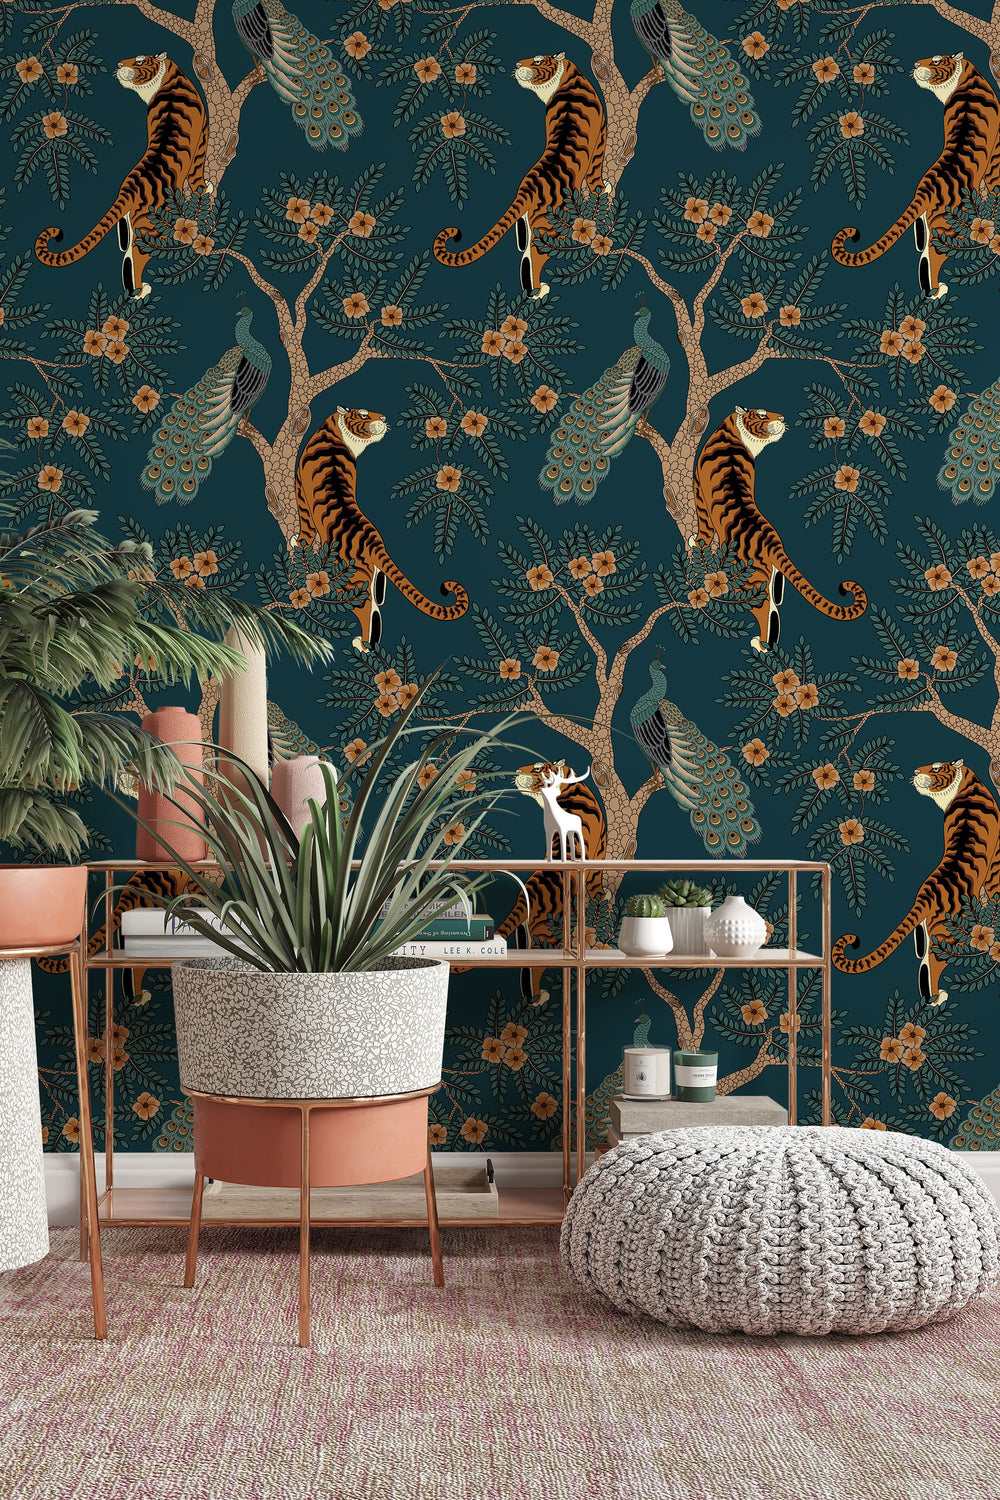 Tiger and Peacock in the woods on the deep green background - Peel & Stick Wallpaper - deep green leaves 3253